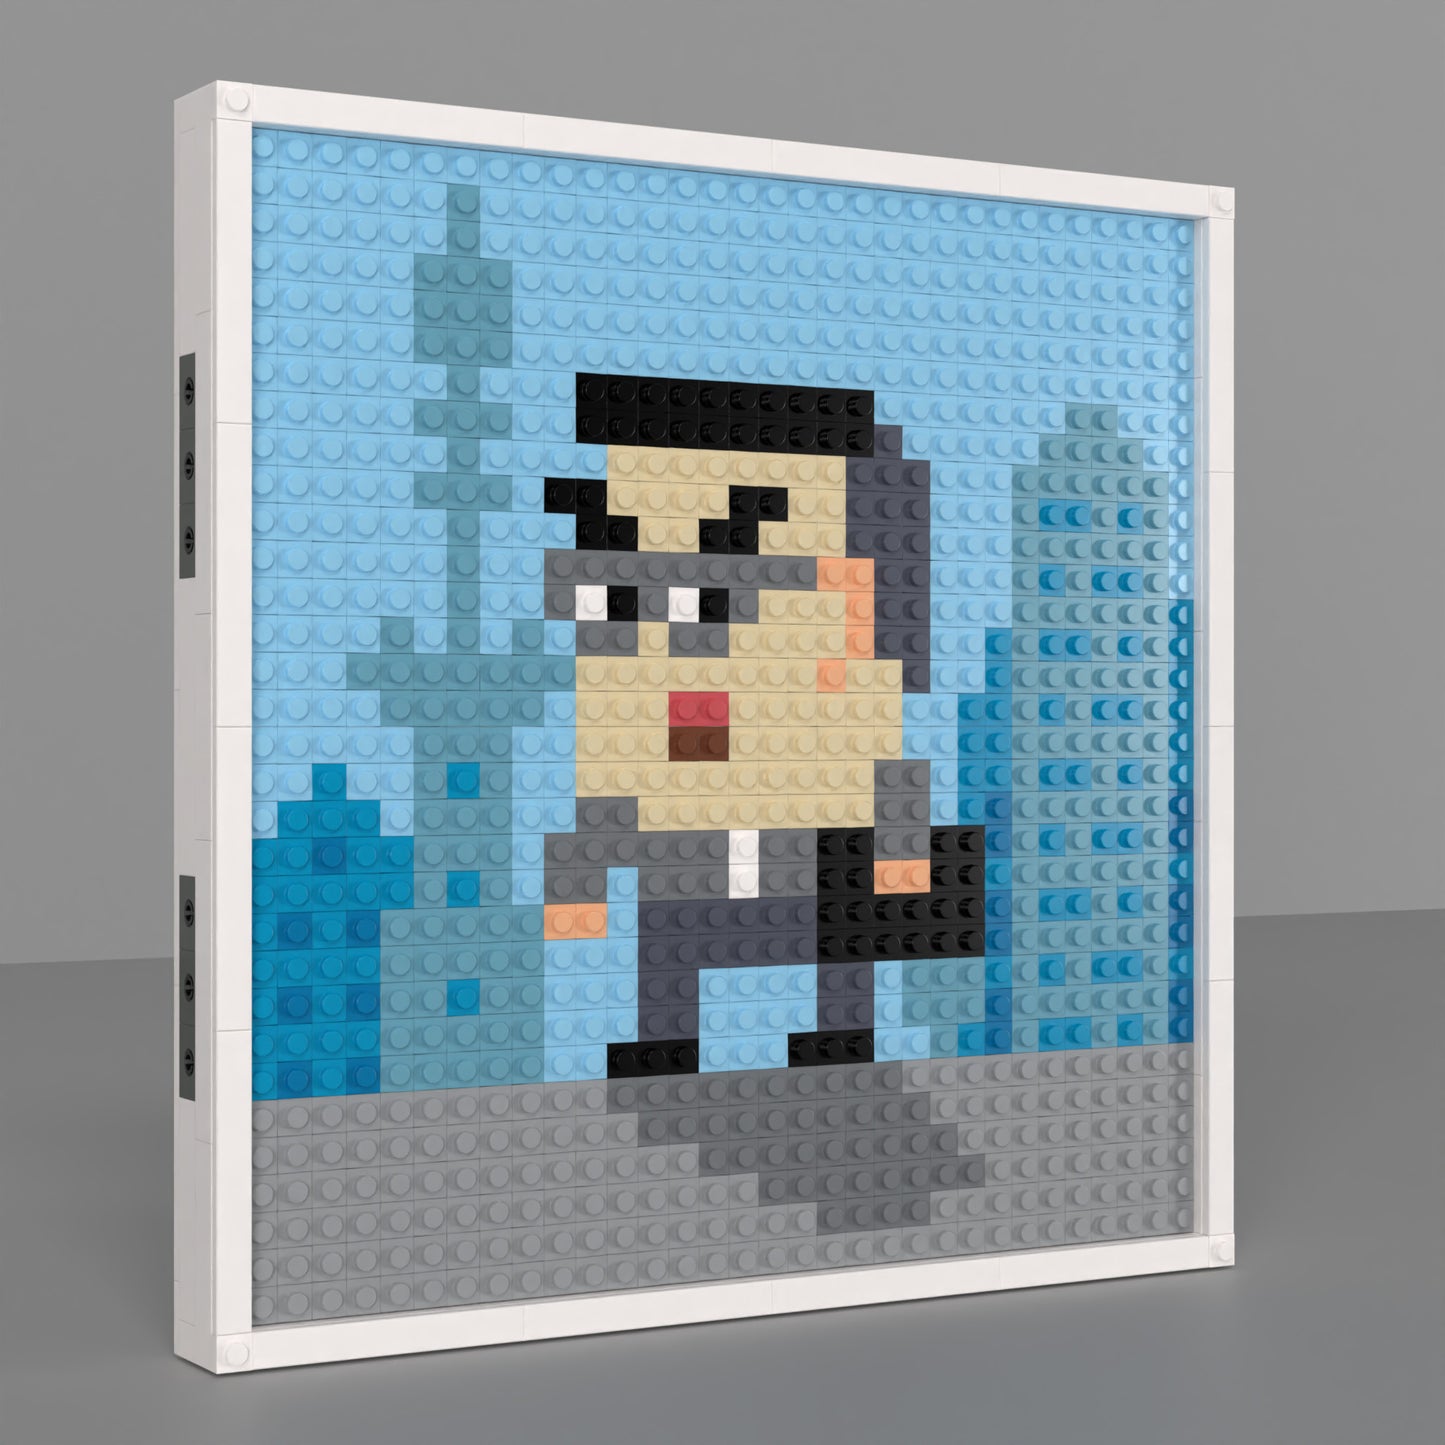 A Pixel Art of A Business Man Walking in The City Made of 32*32 Compatible Lego Bricks